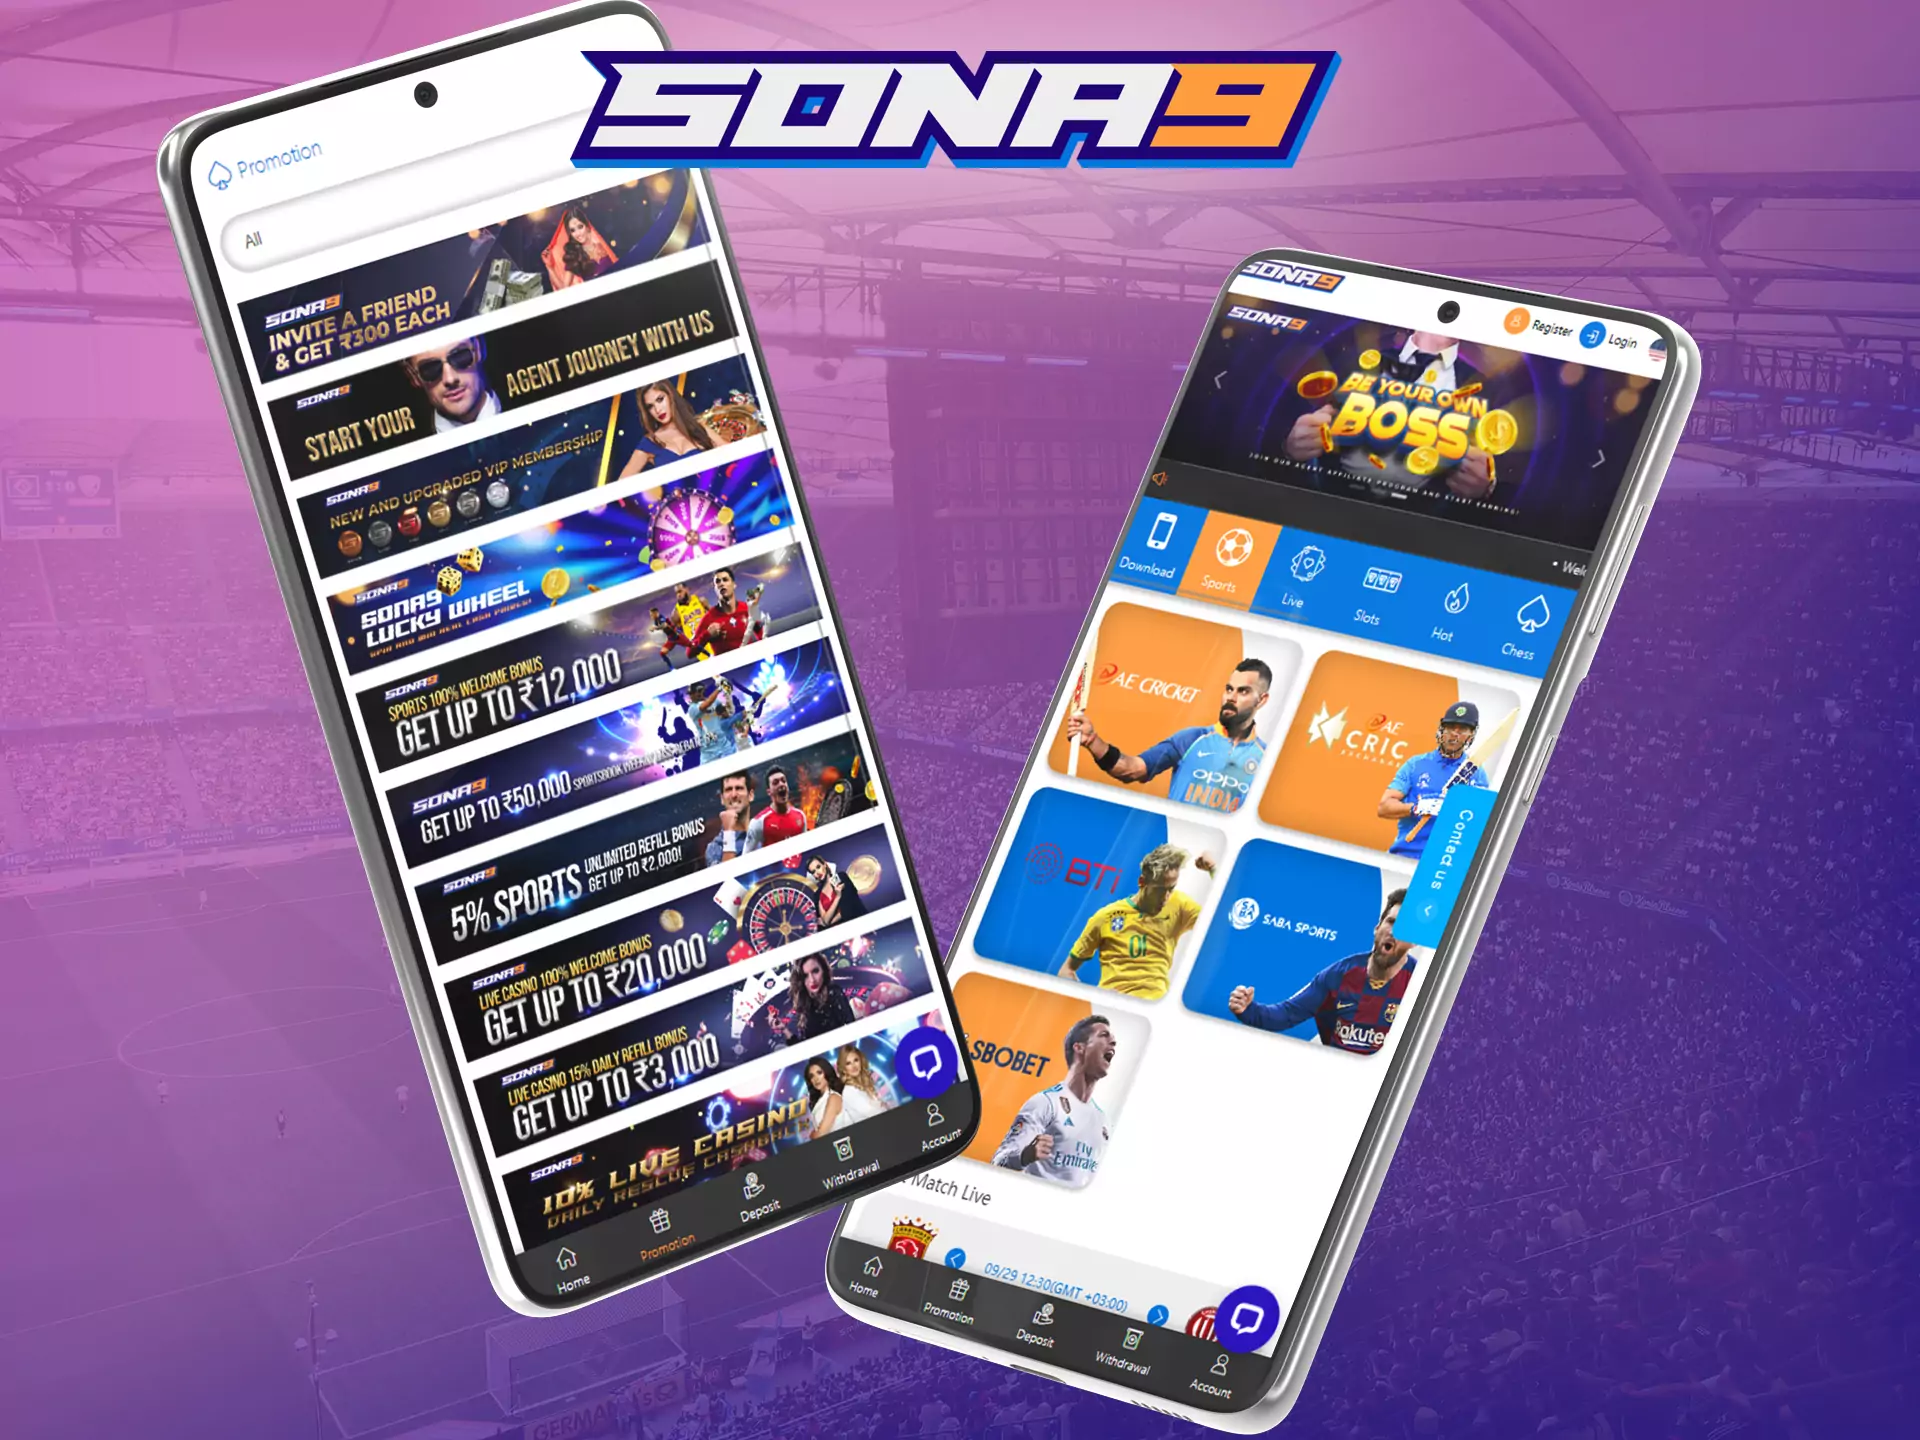 If you don't want to install the Sona9 app on your device, you can bet using a mobile website.